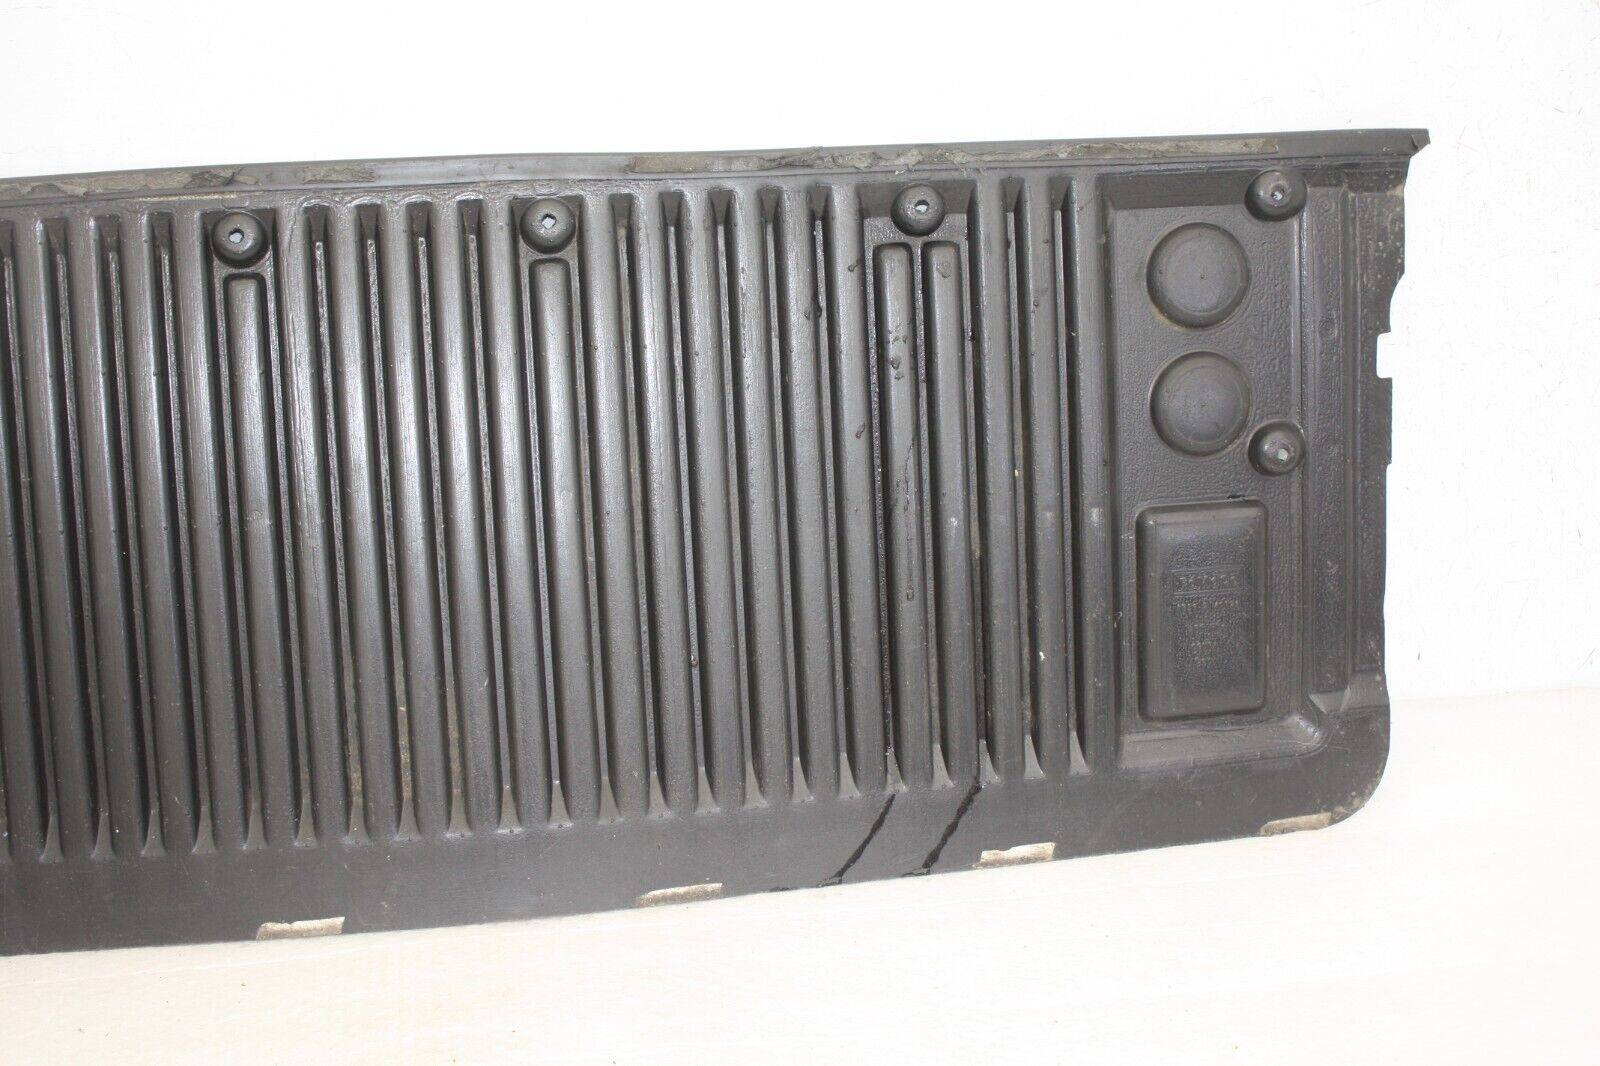 Ford-Ranger-Tailgate-Liner-Protector-Cover-AB39-2140726-Genuine-176321614493-2